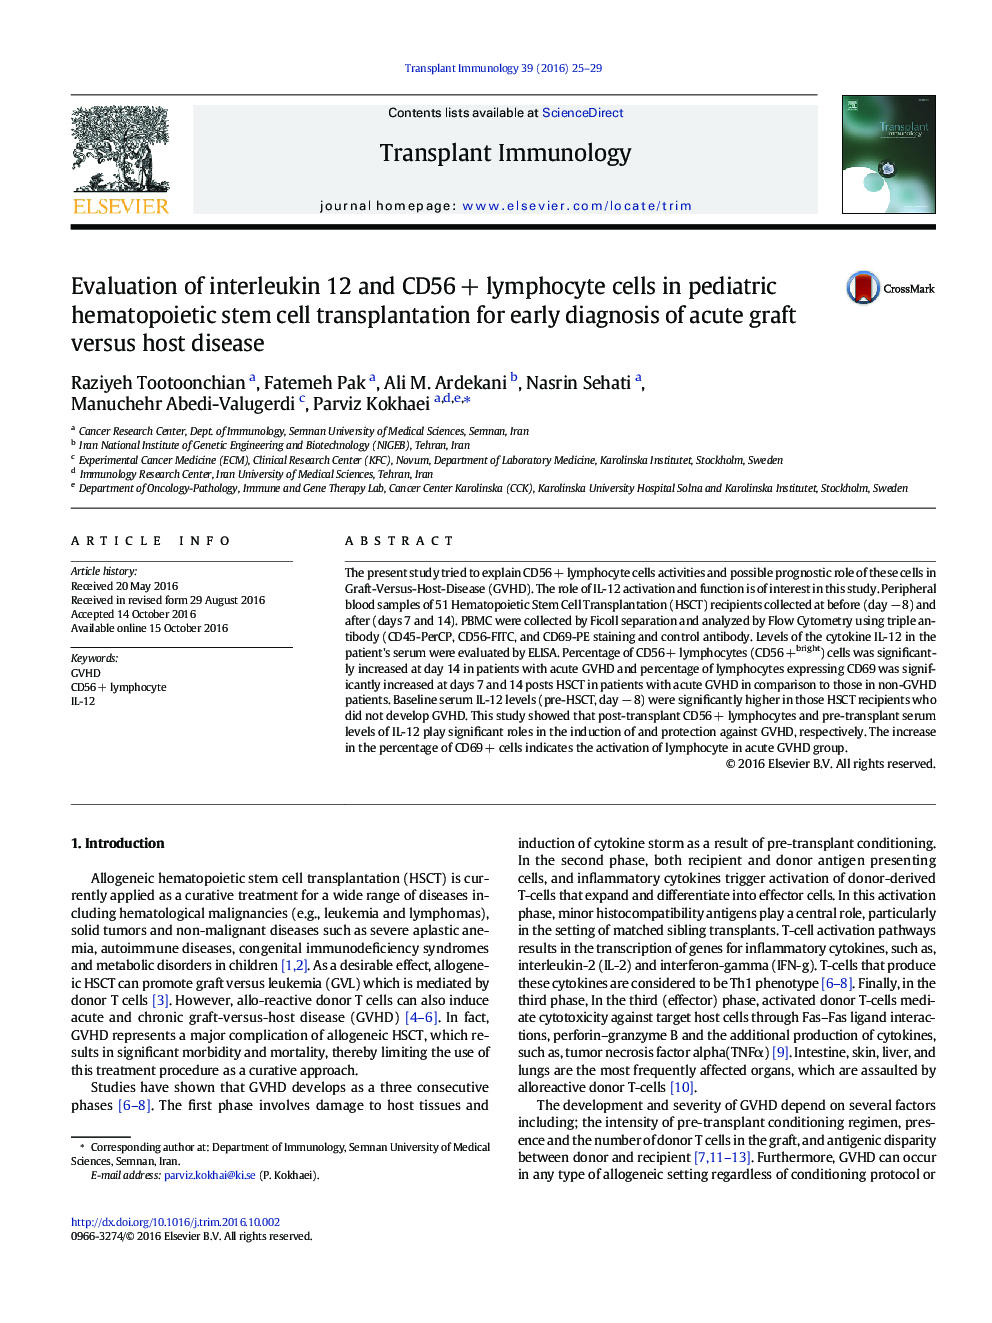 Evaluation of interleukin 12 and CD56 + lymphocyte cells in pediatric hematopoietic stem cell transplantation for early diagnosis of acute graft versus host disease